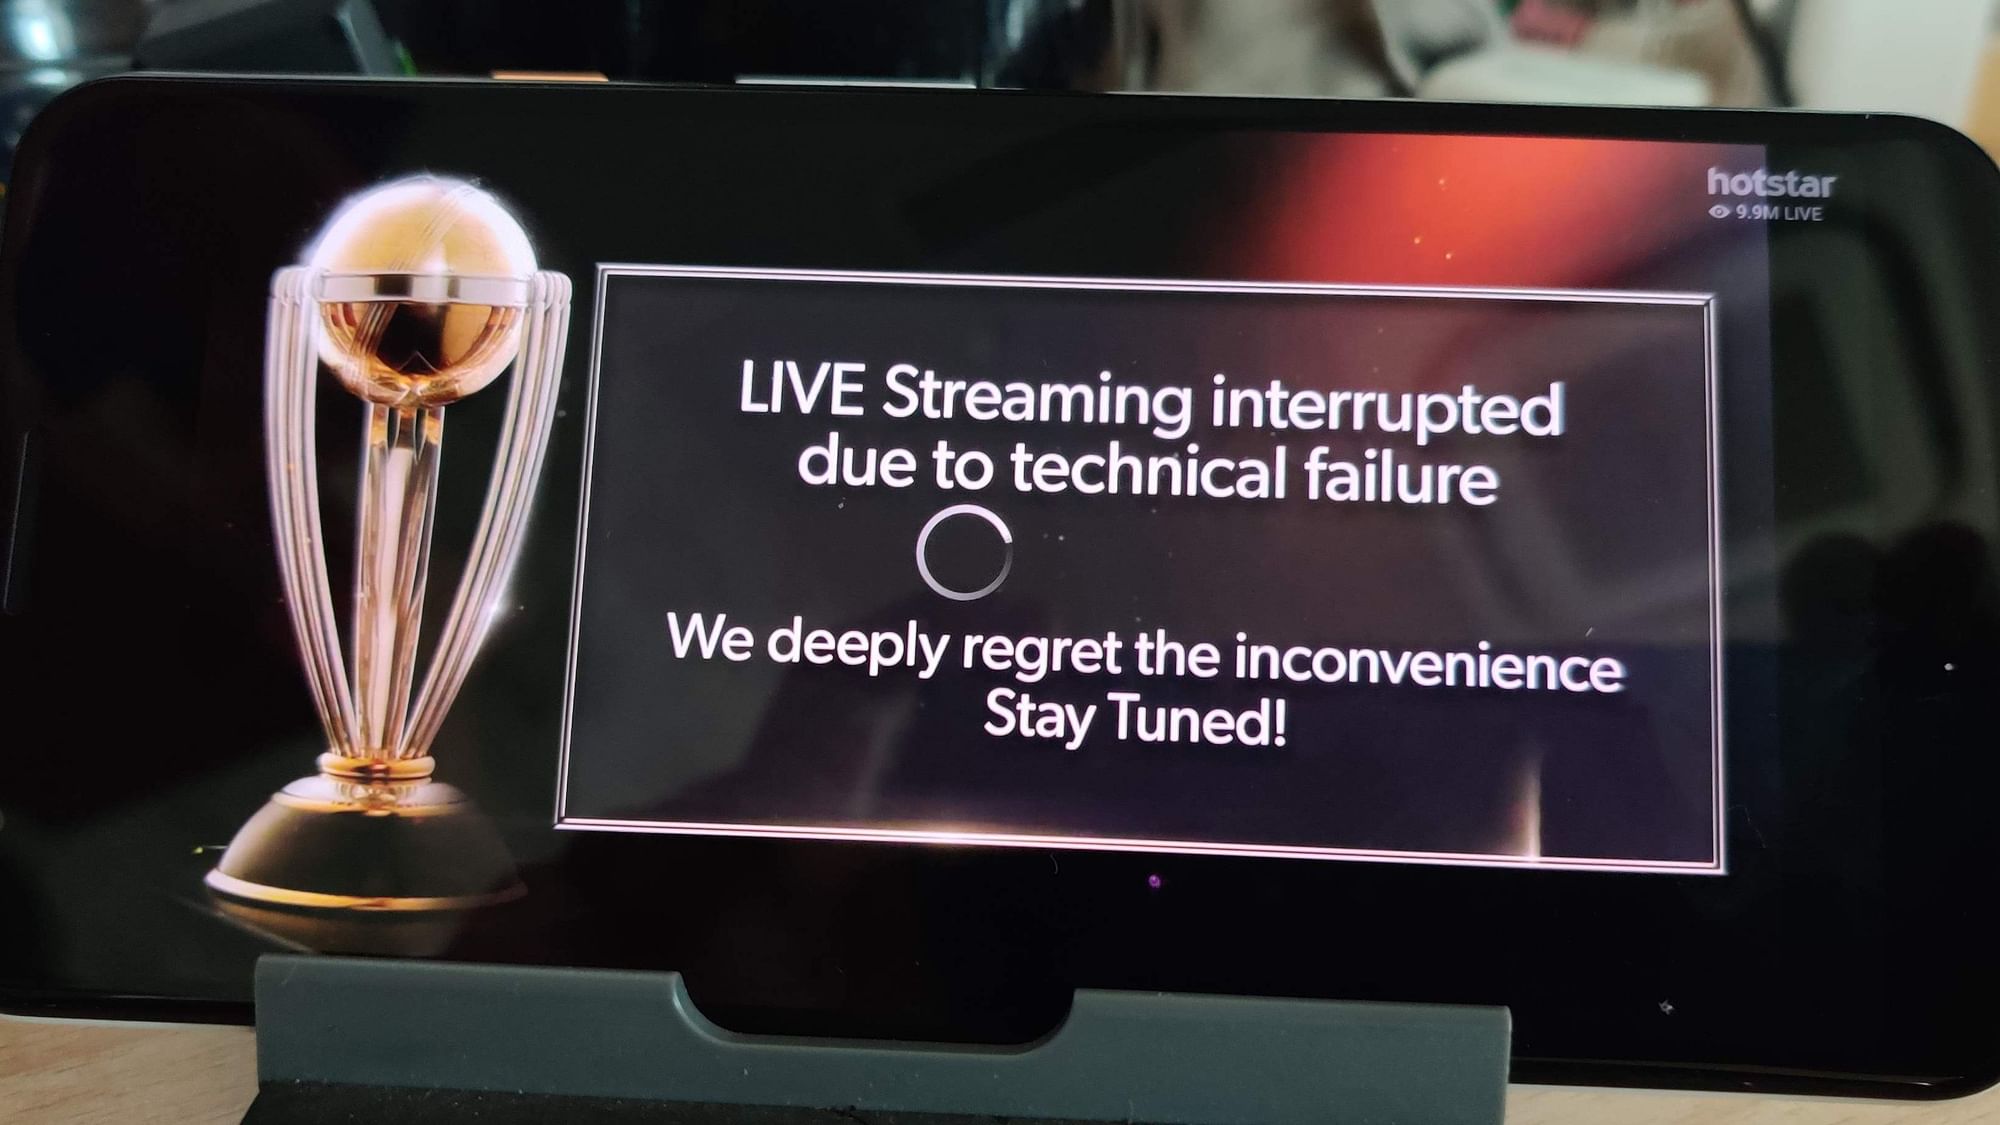 ICC Cricket World Cup 2019 Hotstar Streaming Went Offline During India vs New Zealand World Cup 2019 Semi Final Match